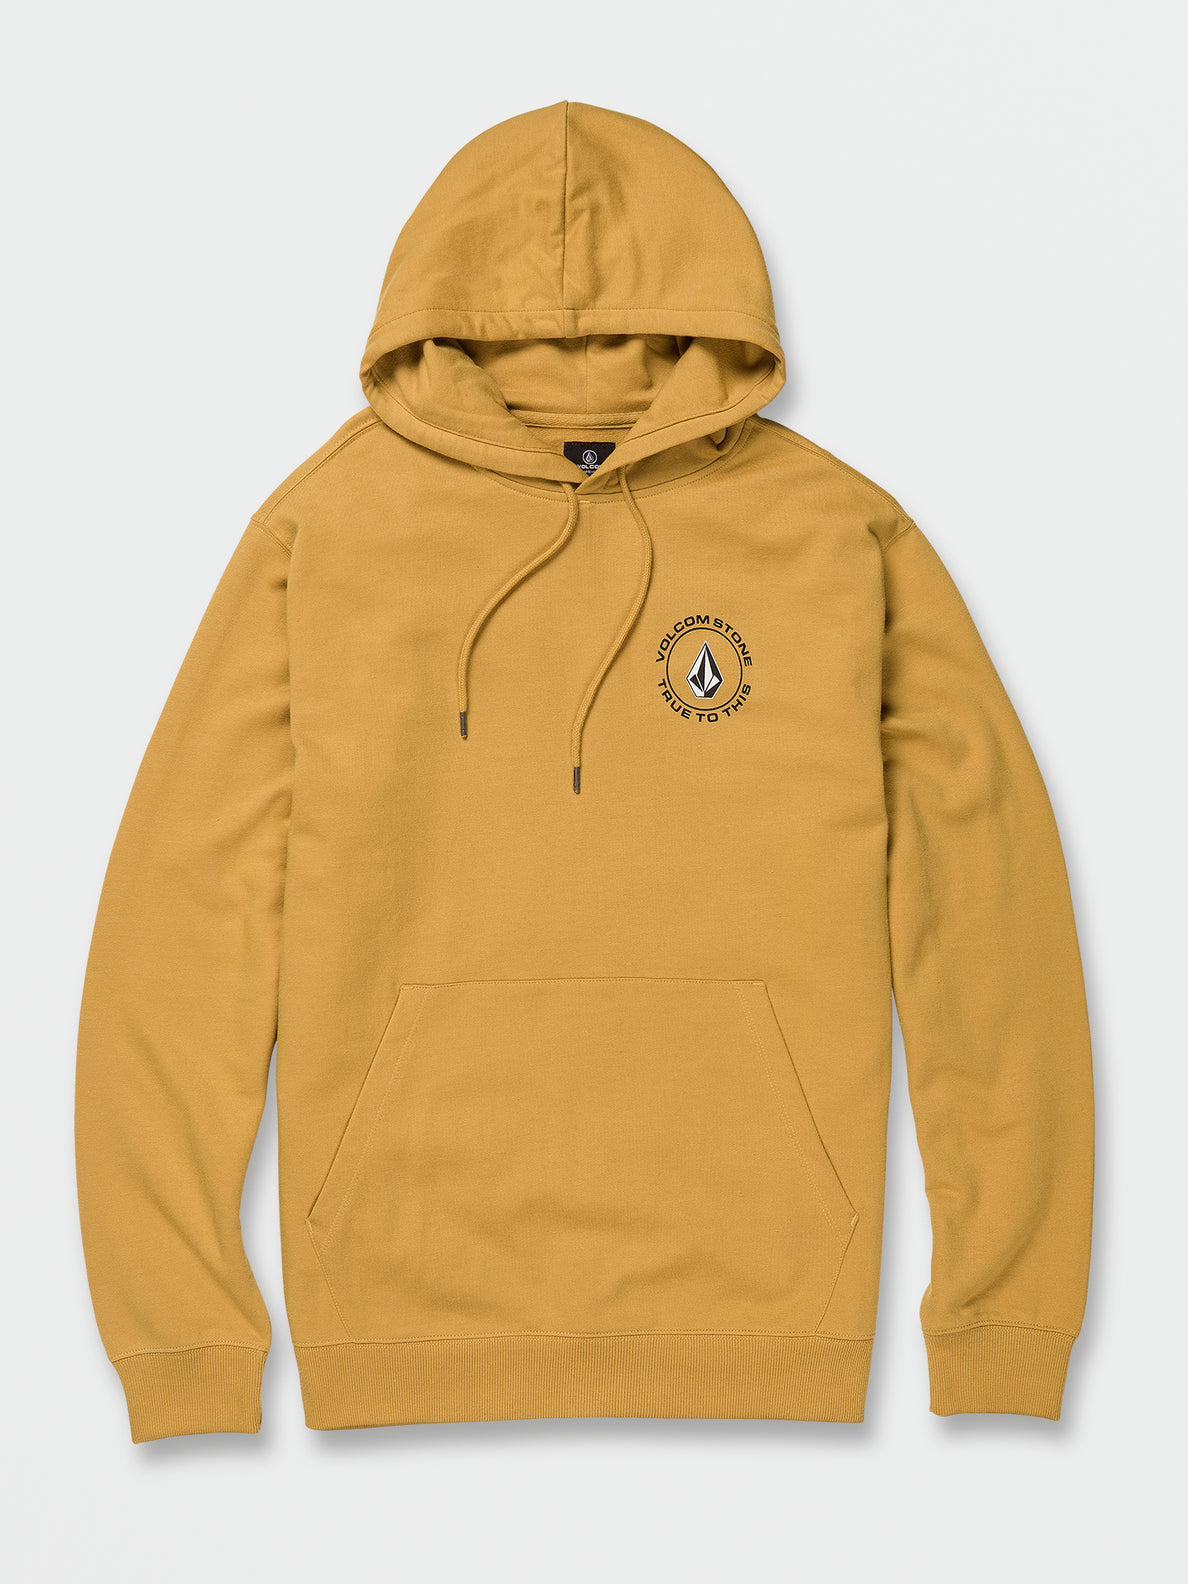 Black Friday Pullover Hoodie - Honey Gold (A4142203_HGD) [F]